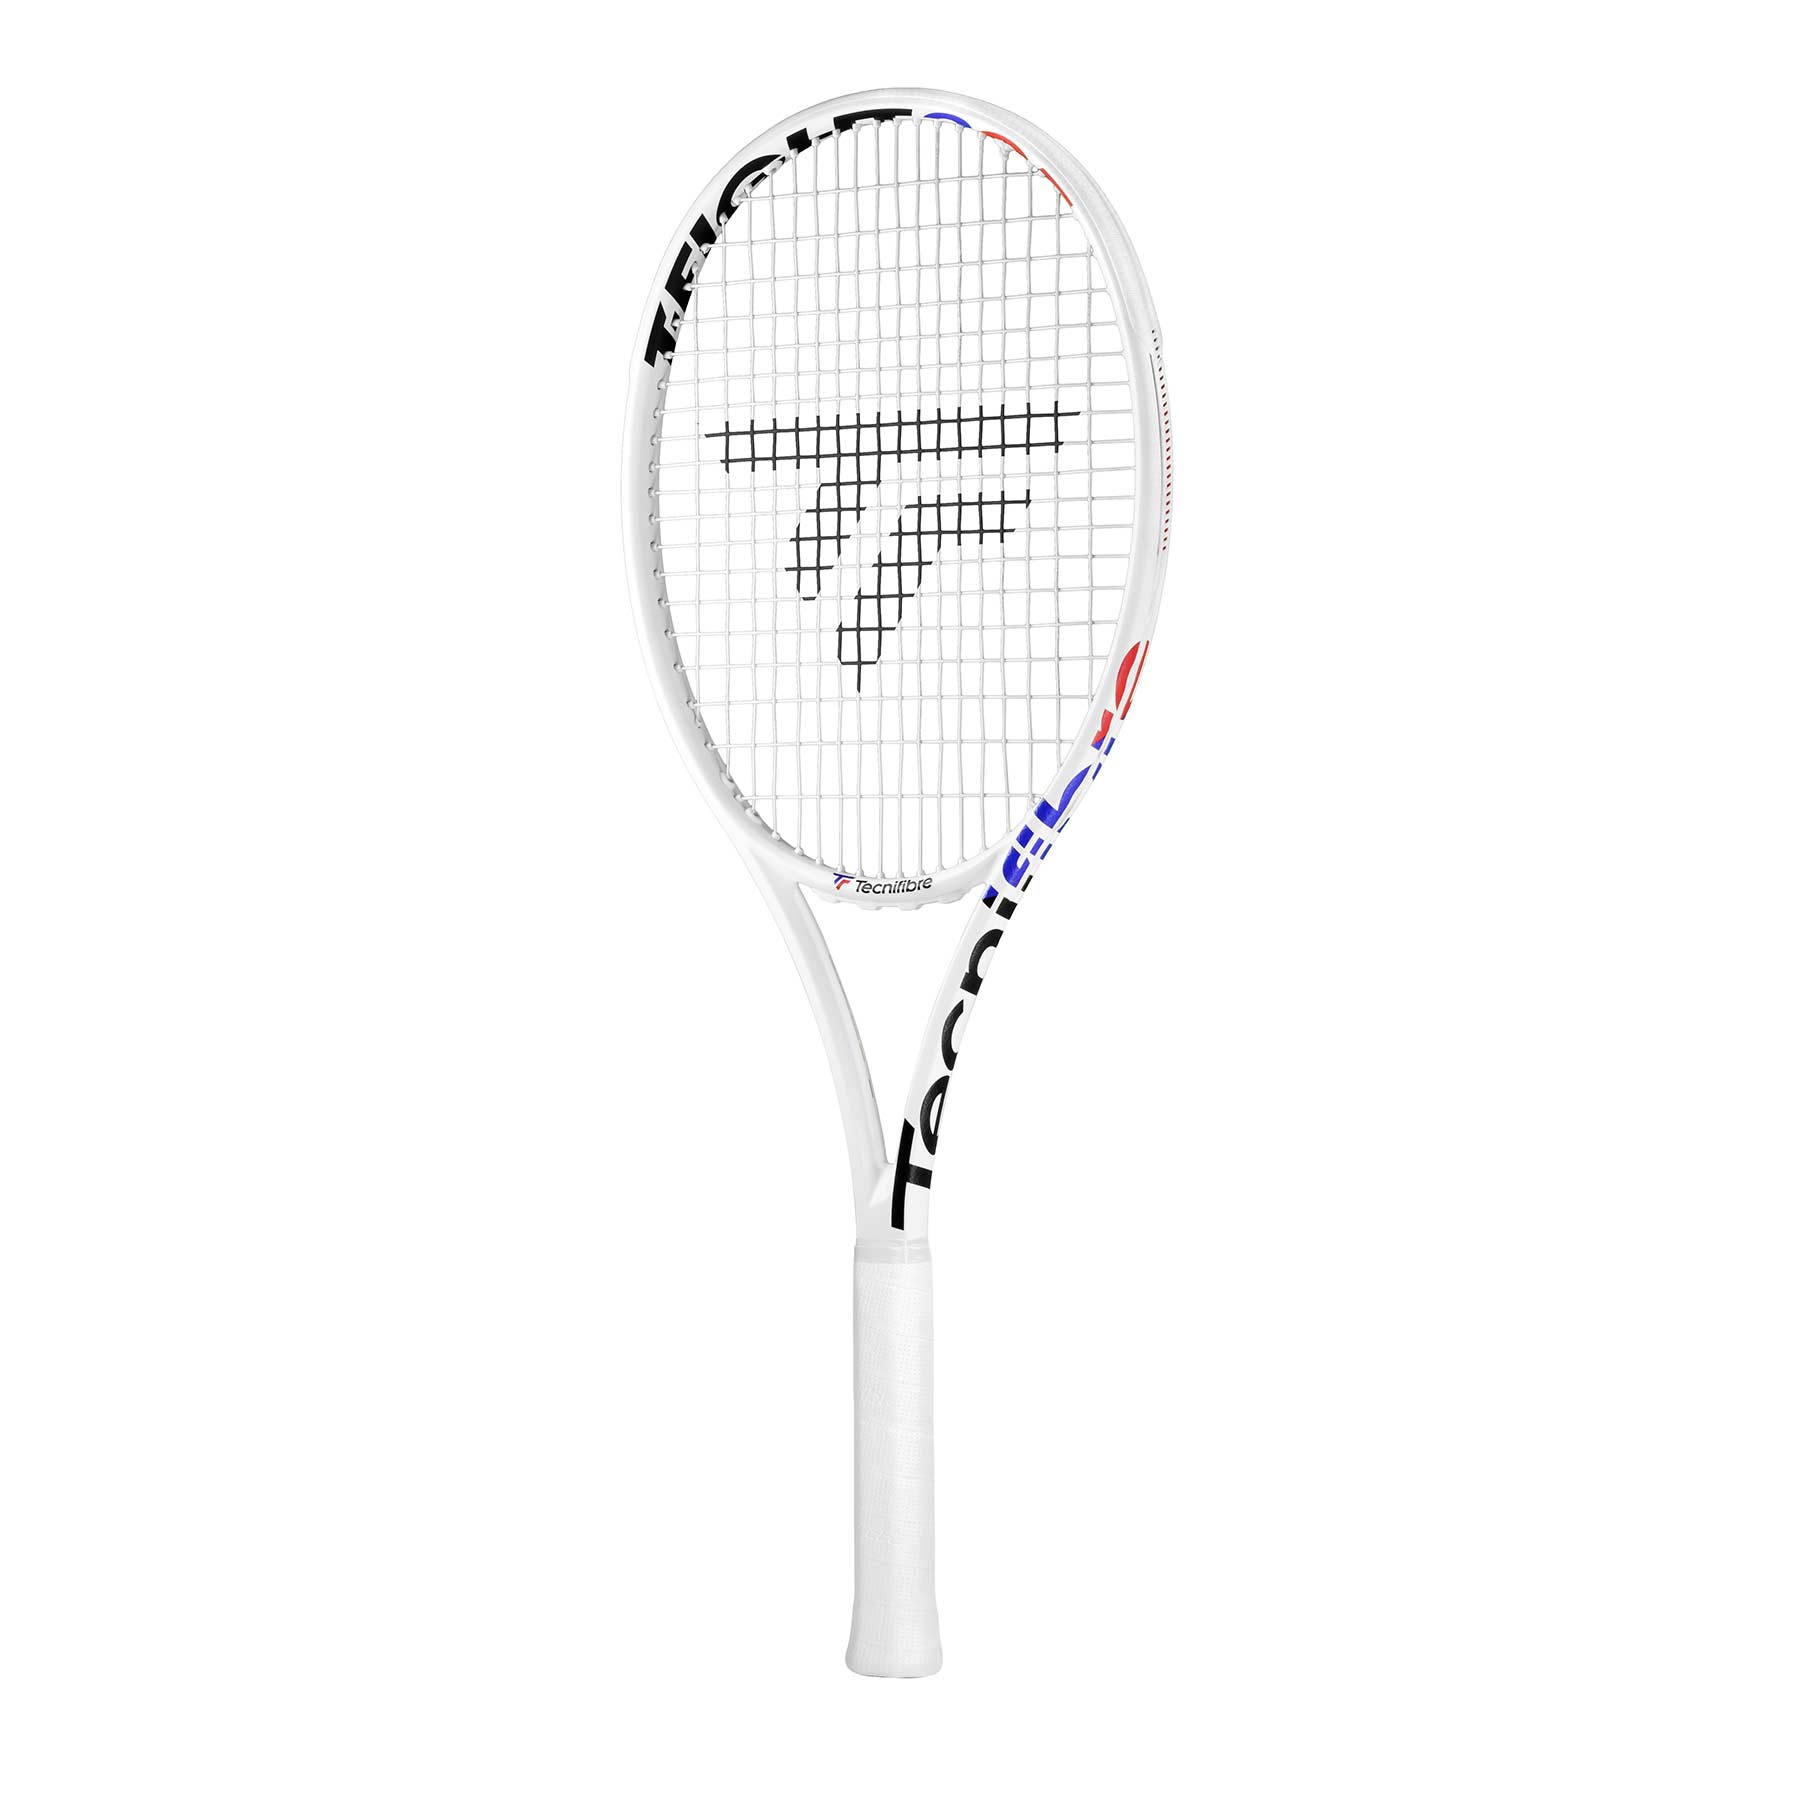 Tecnifibre T-Fight ISO 280 Tennis Racket with a white, royal, and red color scheme